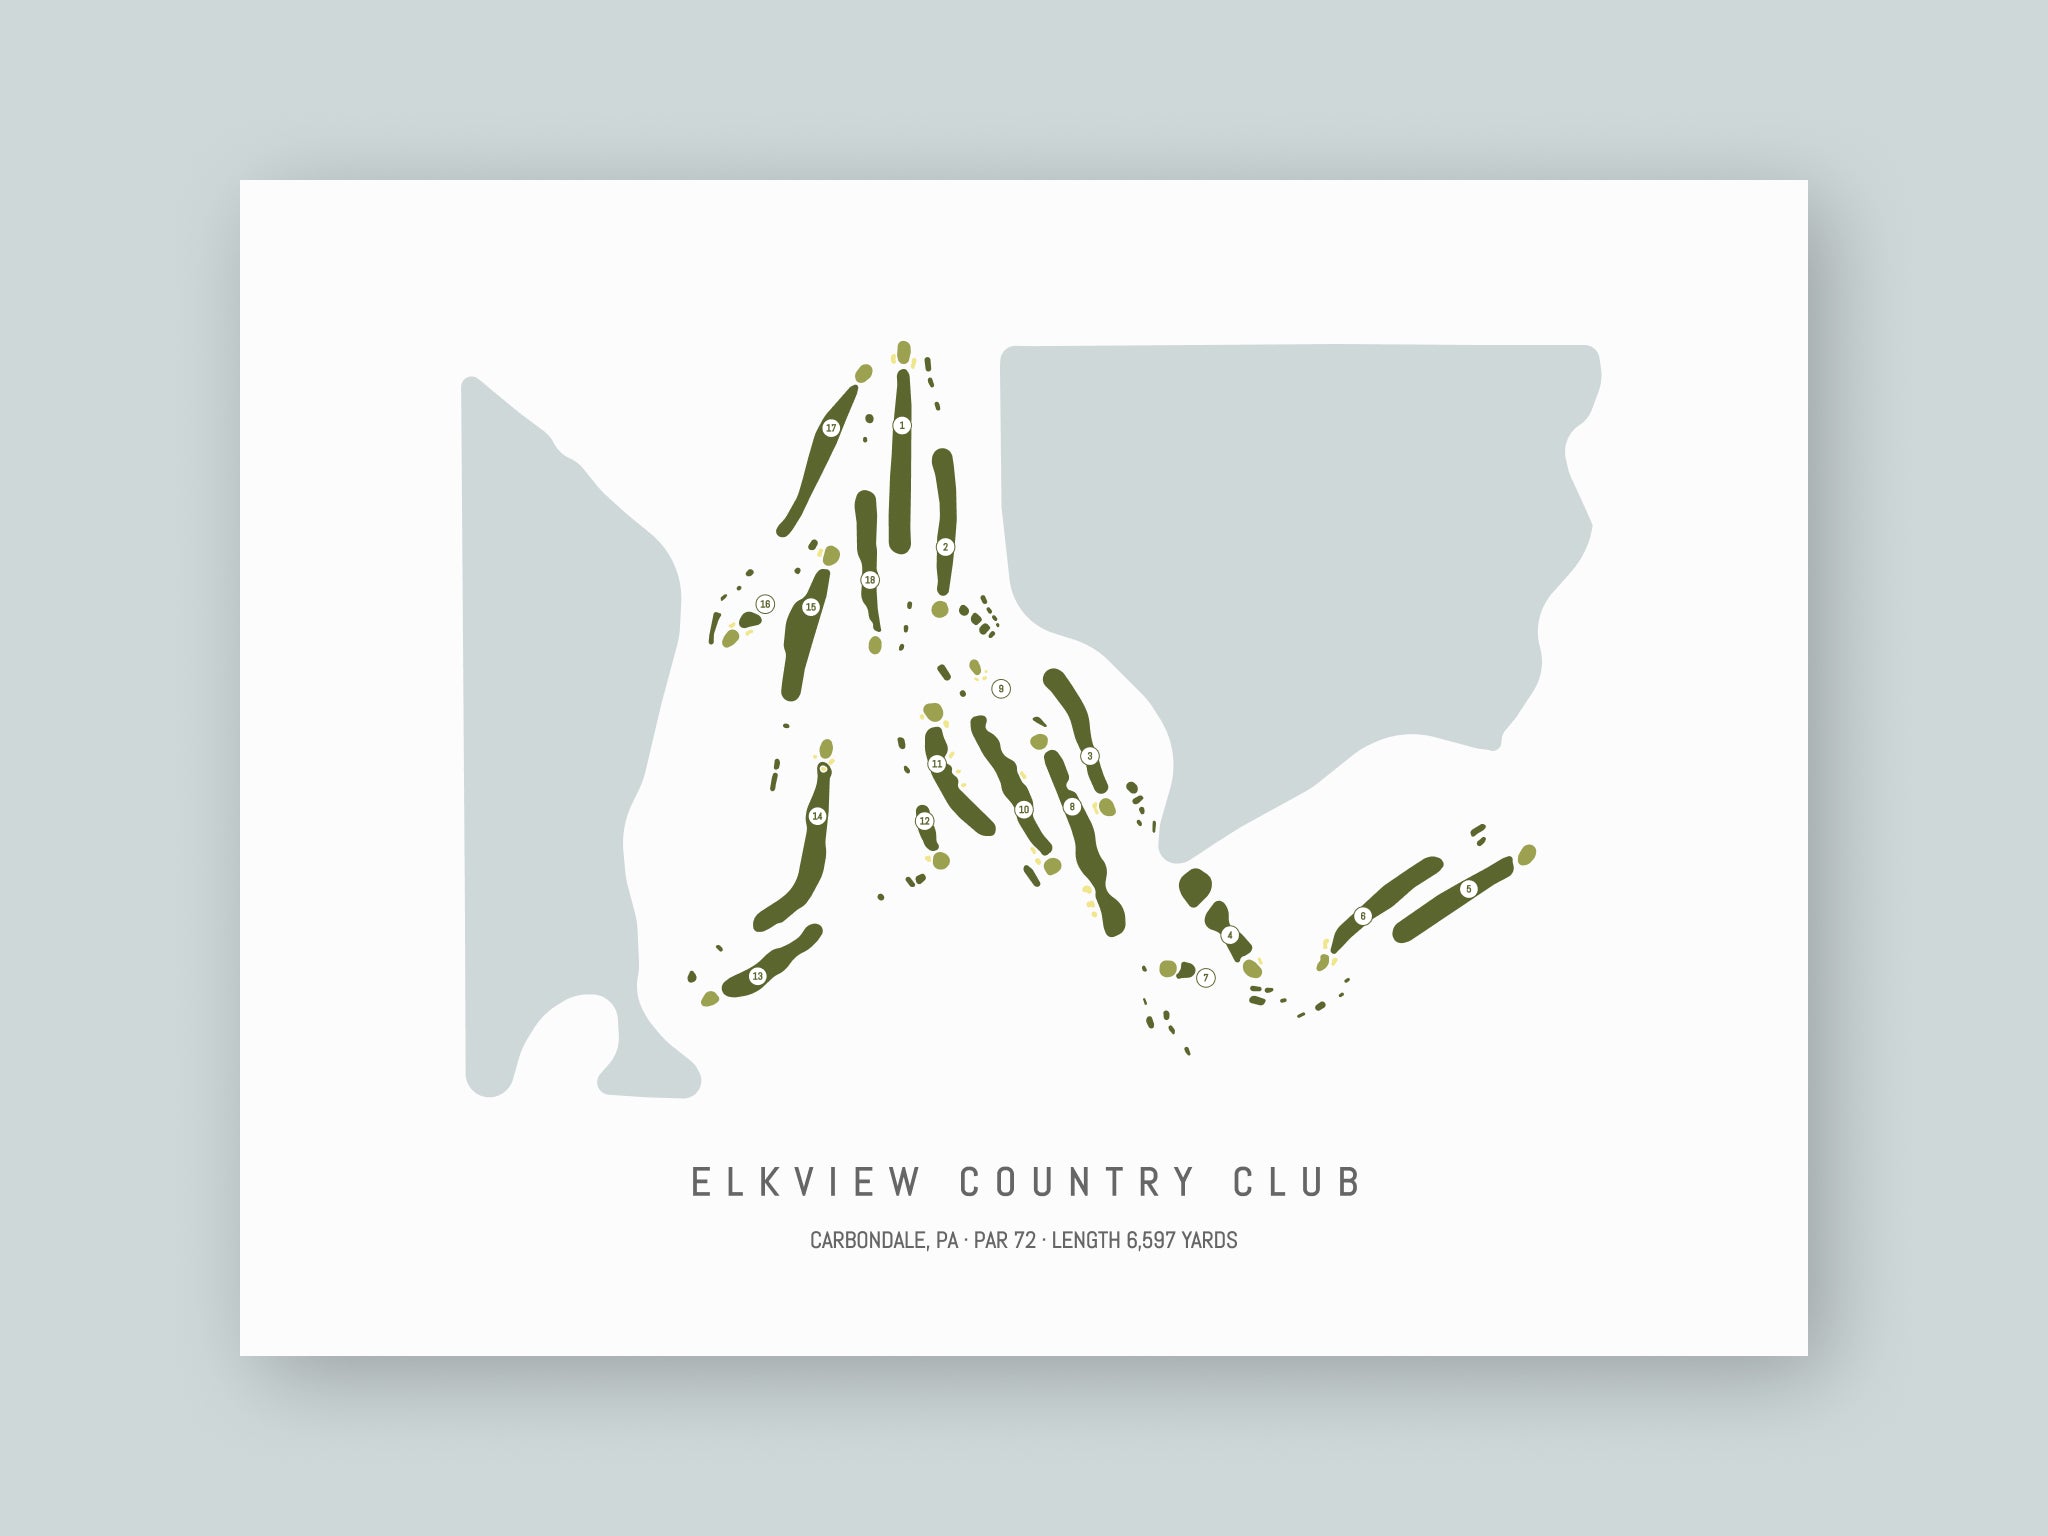 Elkview-Country-Club-PA--Unframed-24x18-With-Hole-Numbers